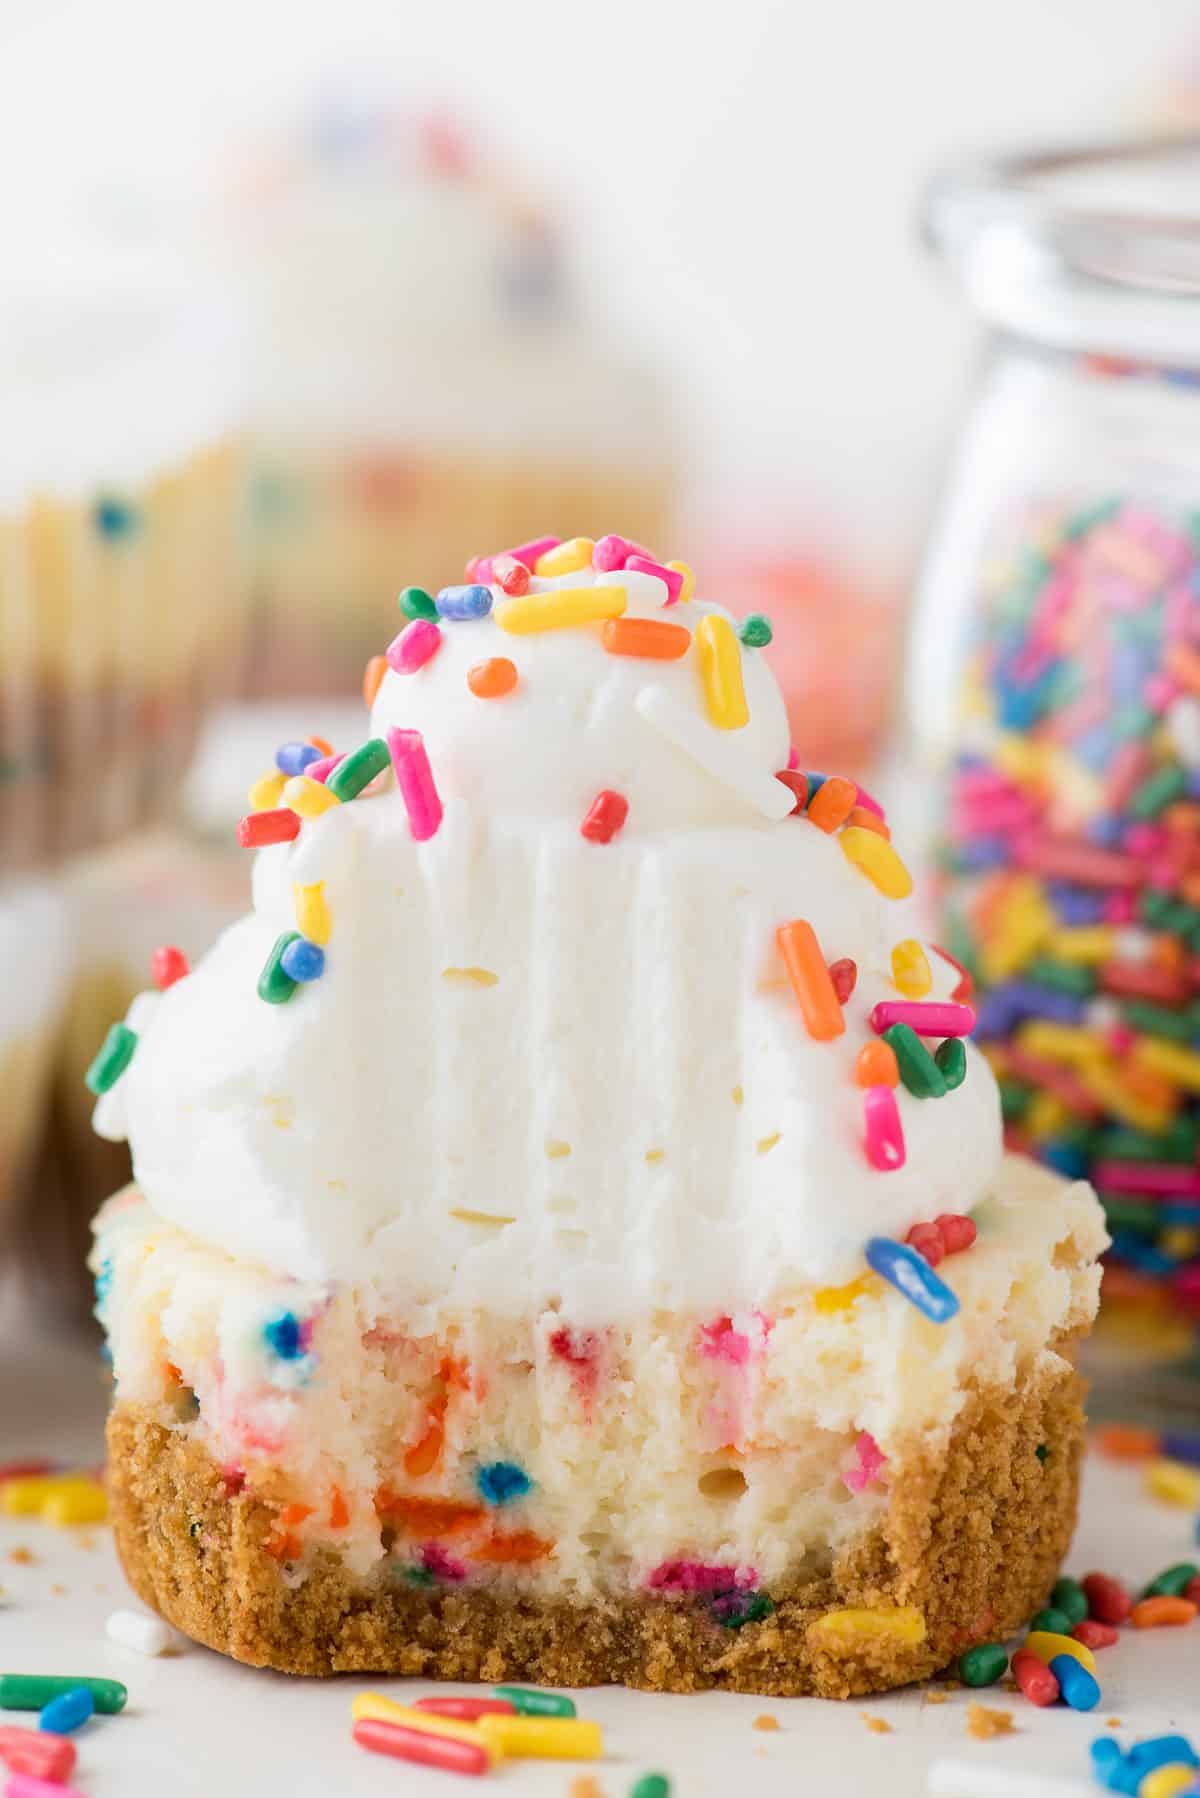 mini funfetti cheesecake with rainbow colored sprinkles on top with a bite taken out